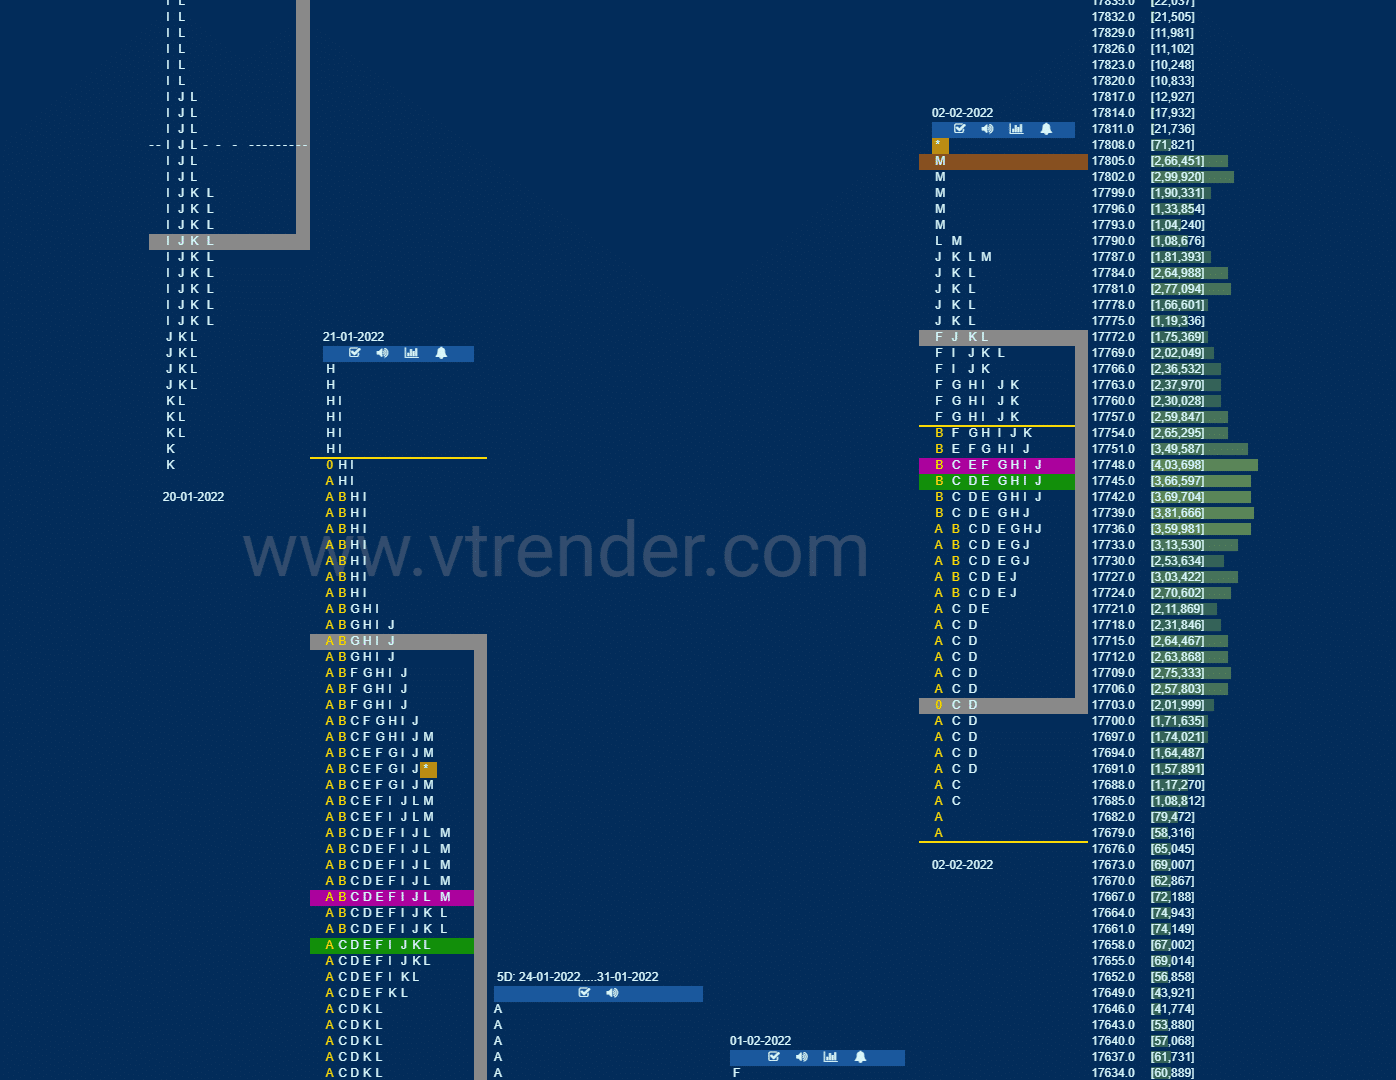 Nf 1 Market Profile Analysis Dated 02Nd February 2022 Banknifty Futures, Charts, Day Trading, Intraday Trading, Intraday Trading Strategies, Market Profile, Market Profile Trading Strategies, Nifty Futures, Order Flow Analysis, Support And Resistance, Technical Analysis, Trading Strategies, Volume Profile Trading